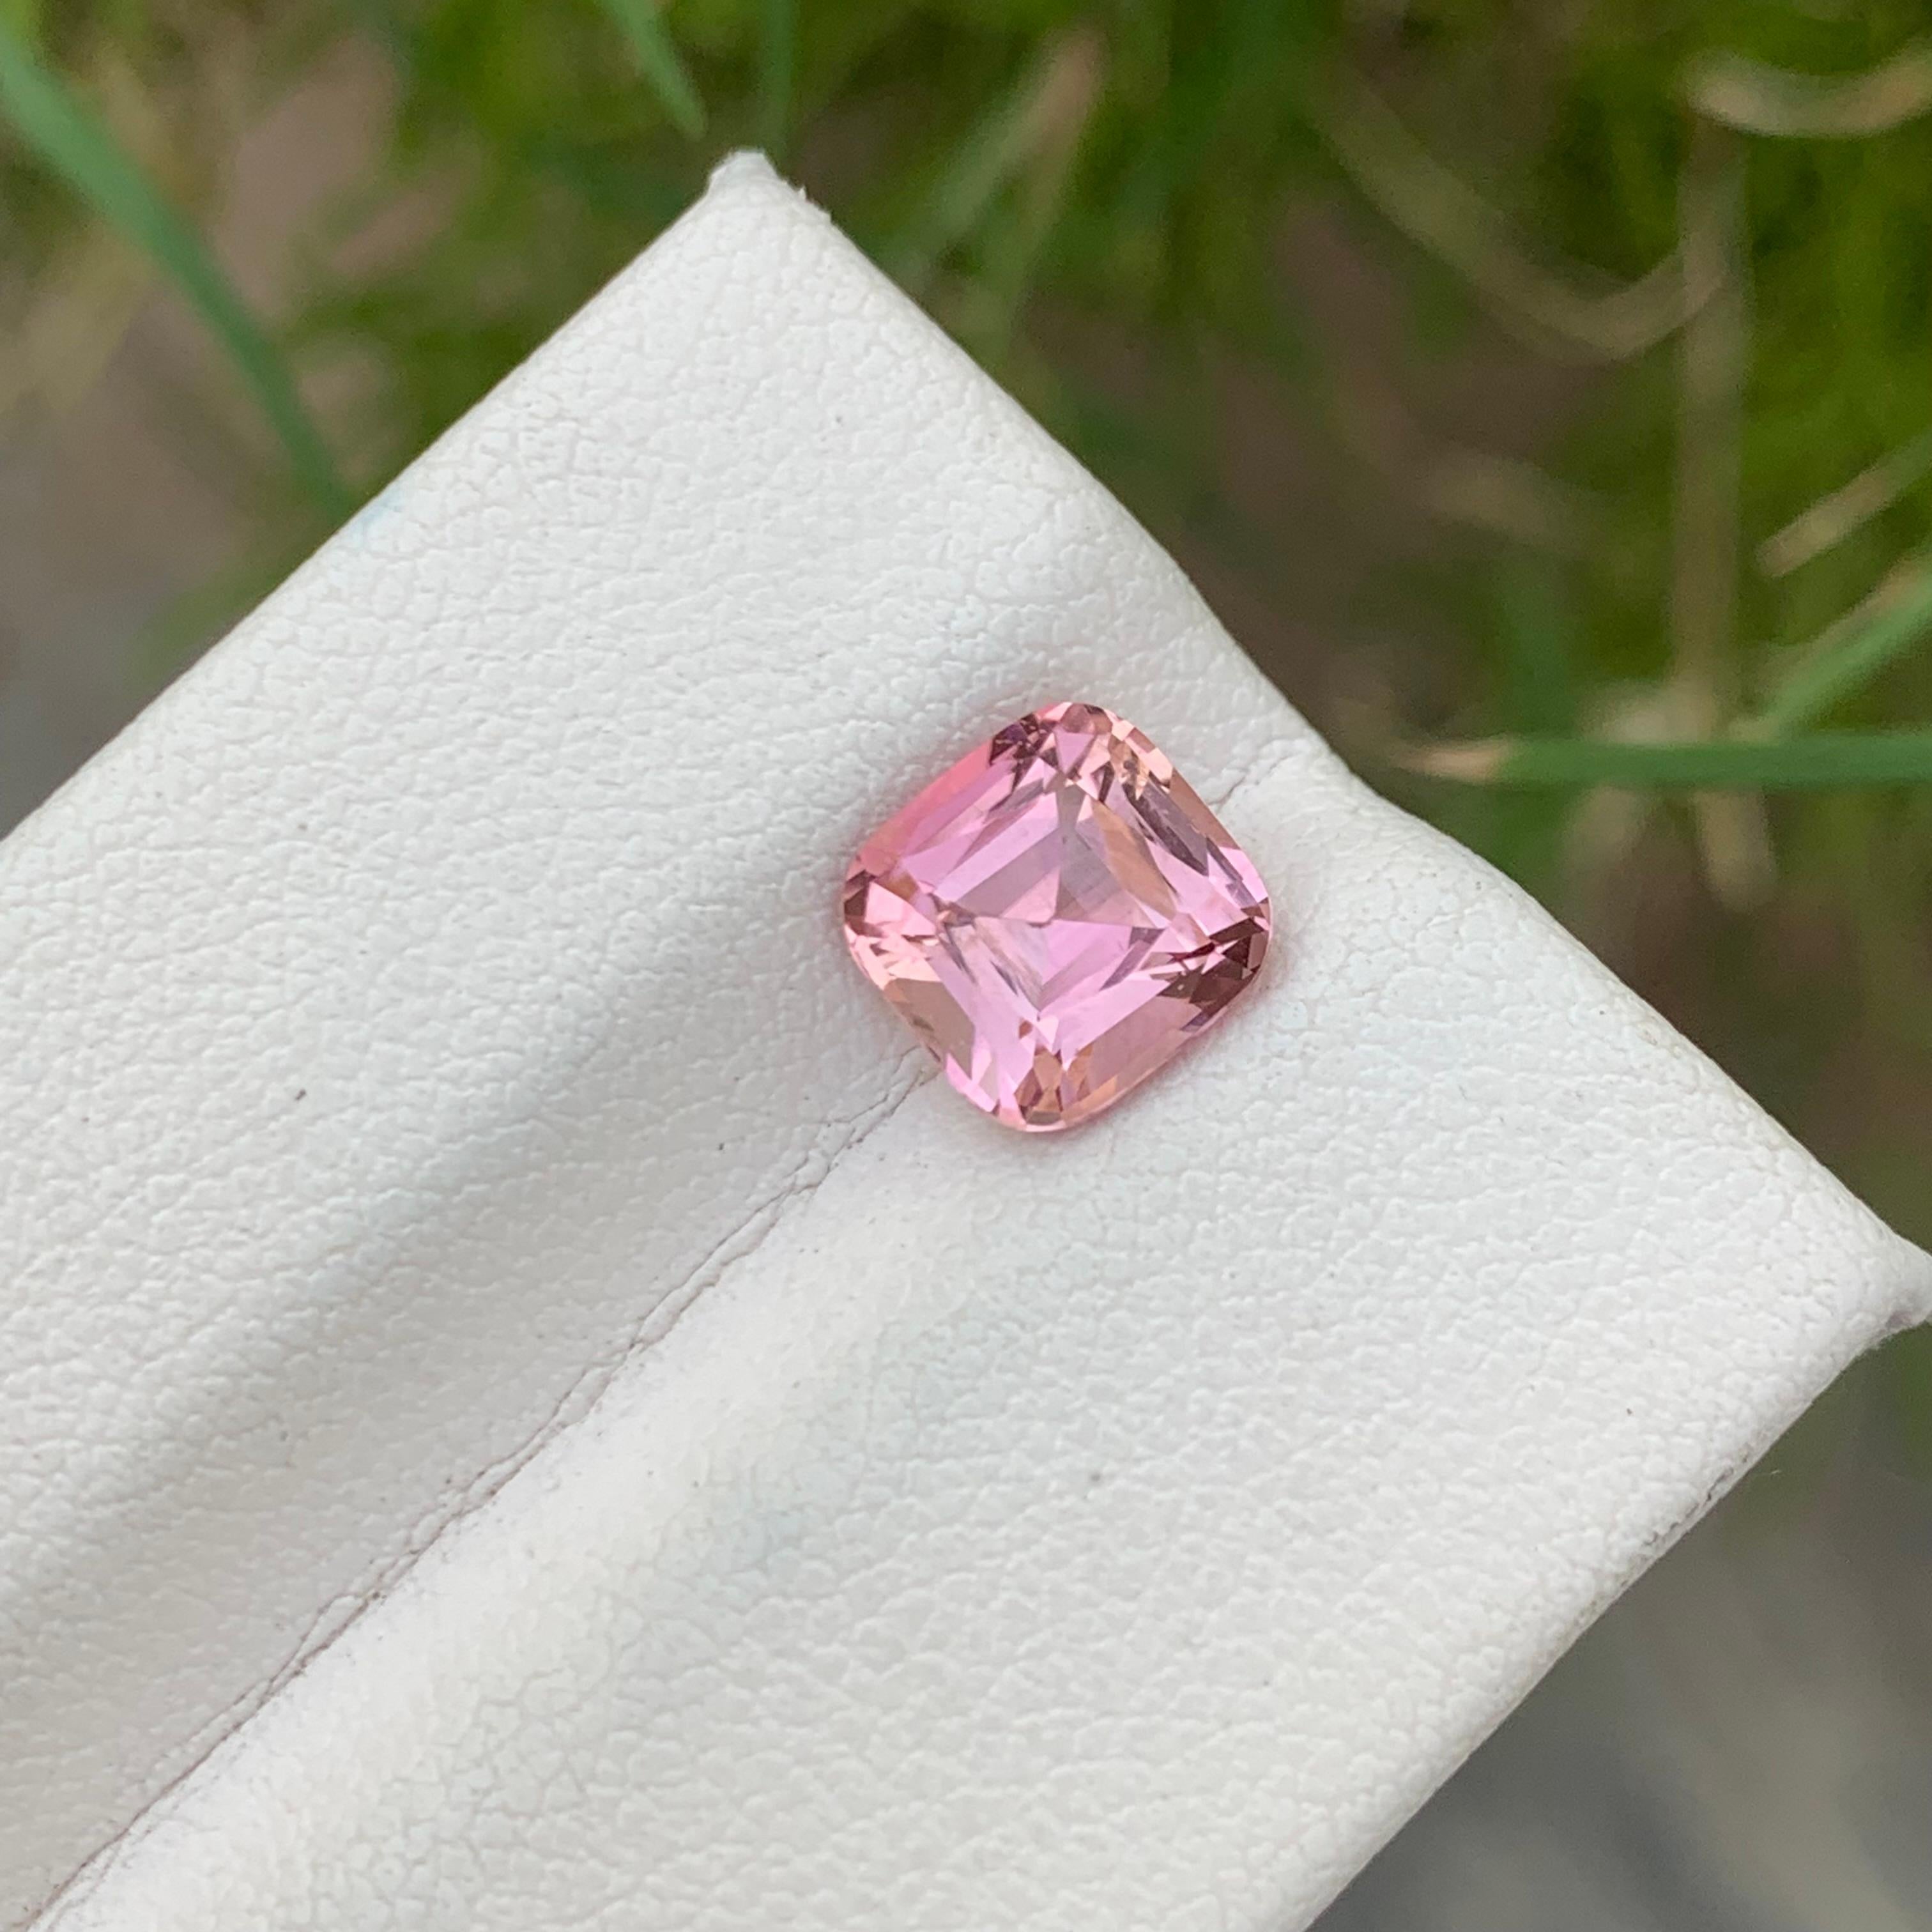 Faceted Tourmaline
Weight: 2.05 Carats
Dimension: 7.6x7.4x5.4 Mm
Origin: Kunar Afghanistan
Color: Pink
Shape: Mix Cushion
Clarity: Eye Clean
Certificate: On Demand

With a rating between 7 and 7.5 on the Mohs scale of mineral hardness, tourmaline